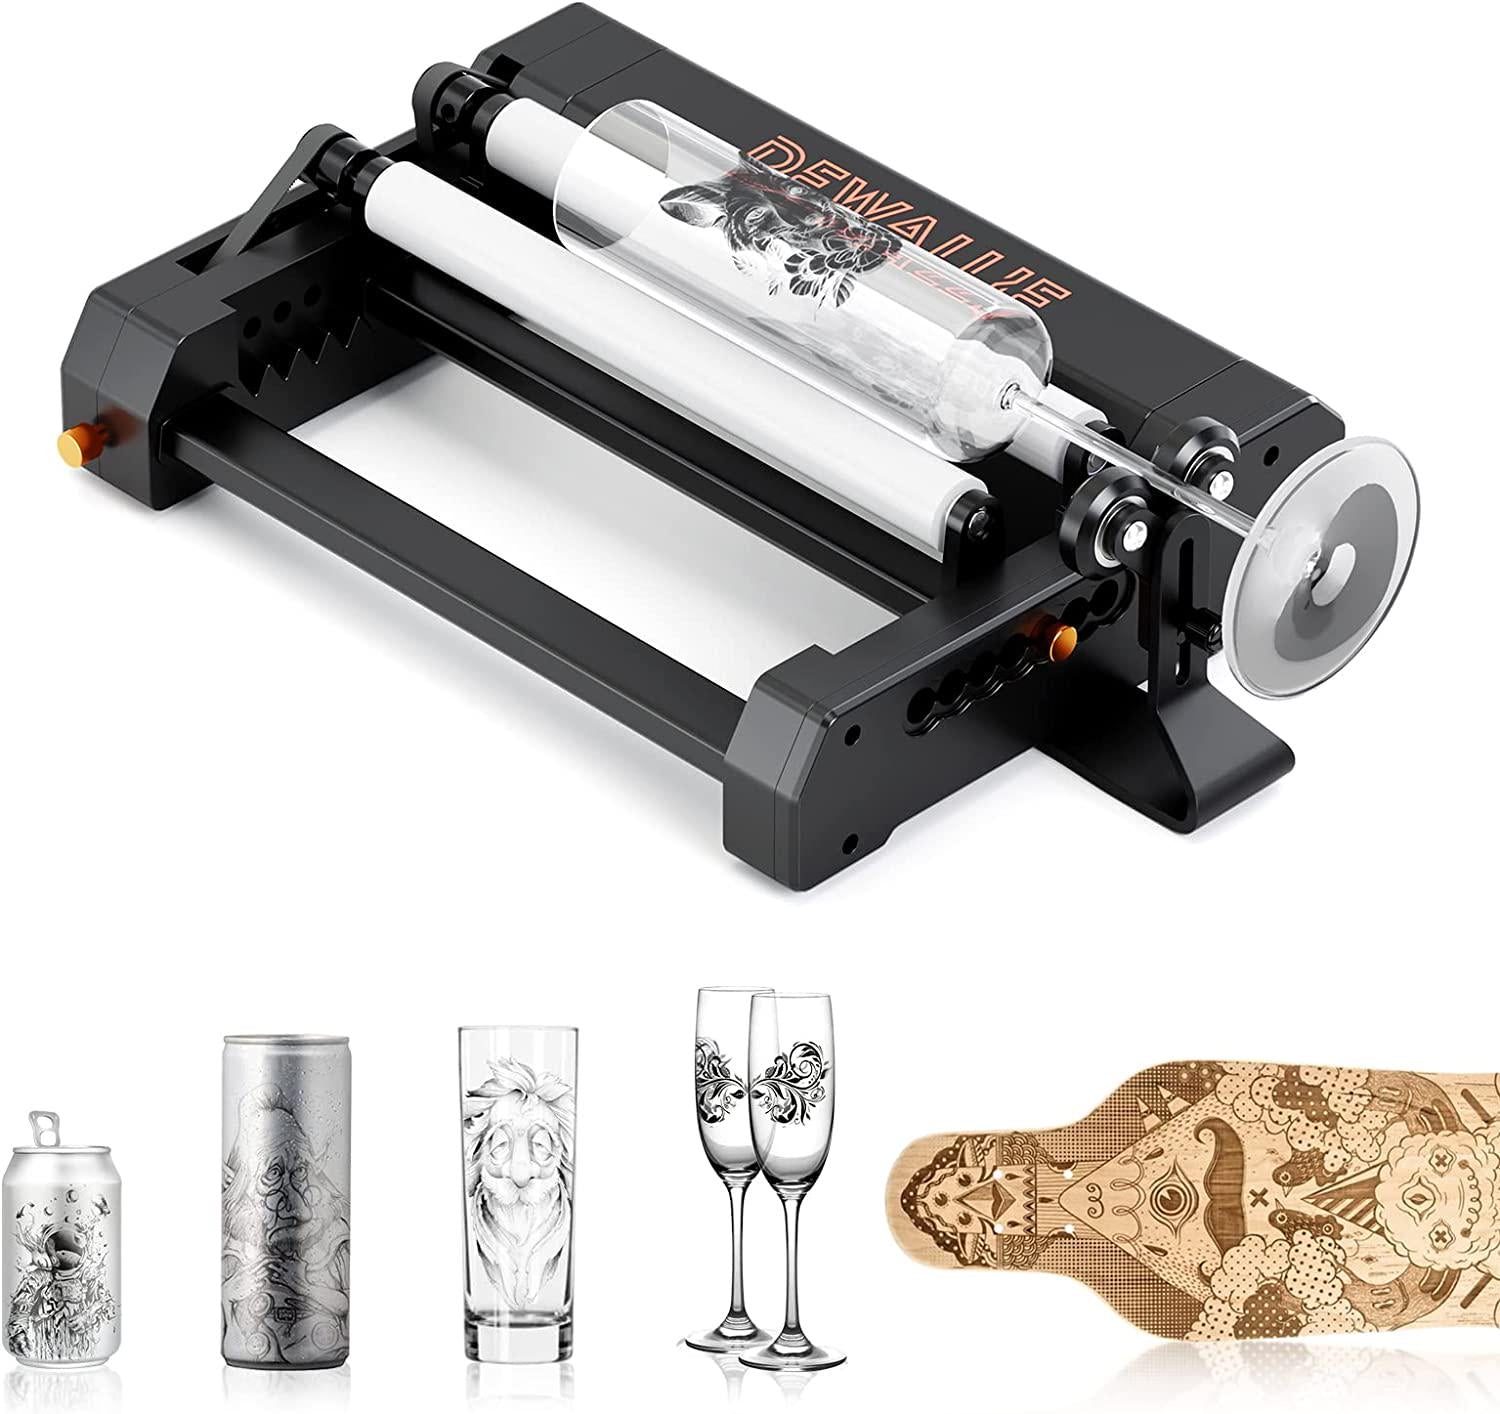 DEWALLIE, Laser Rotation Roller, DEWALLIE Laser Engraver Y-axis Rotary Roller Engraving Module with 360° Rotating, for Engraving Cylindrical Objects Cans